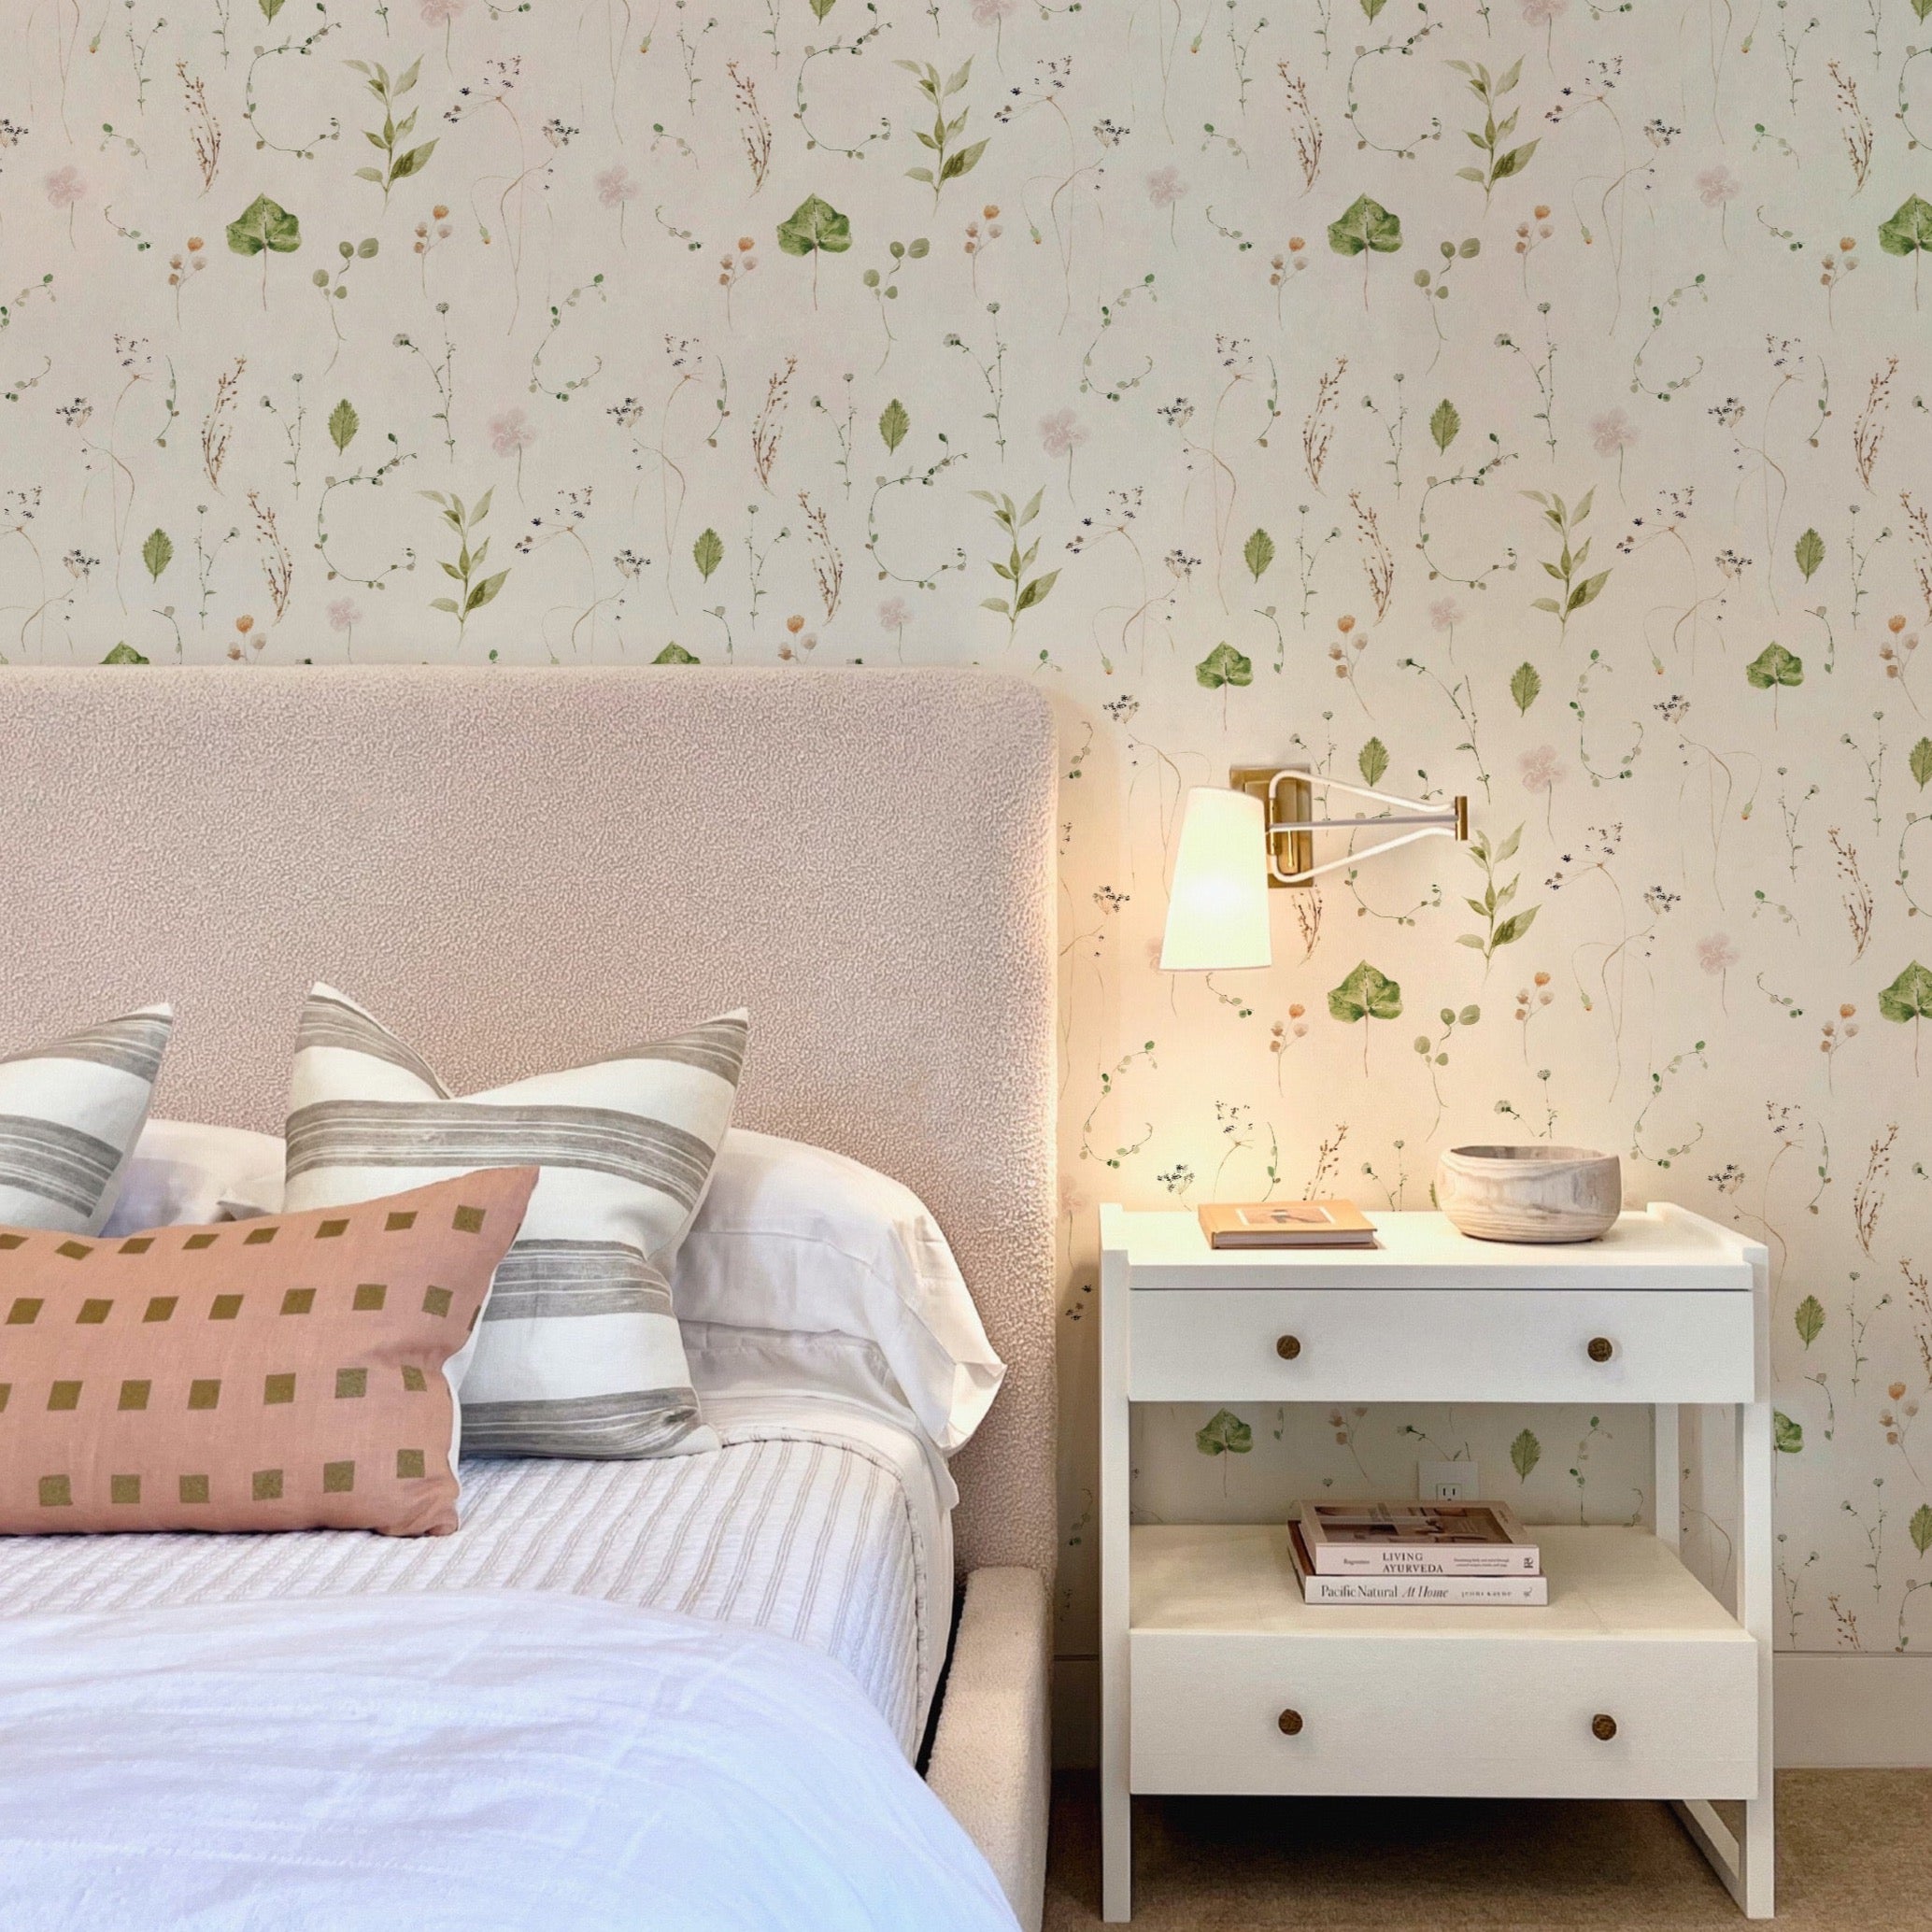 Elegant bedroom decor enhanced by 'Modern Watercolour Floral - Nude Pink' wallpaper, creating a peaceful and serene atmosphere with its subtle floral patterns, complemented by minimalist furniture and soft lighting.